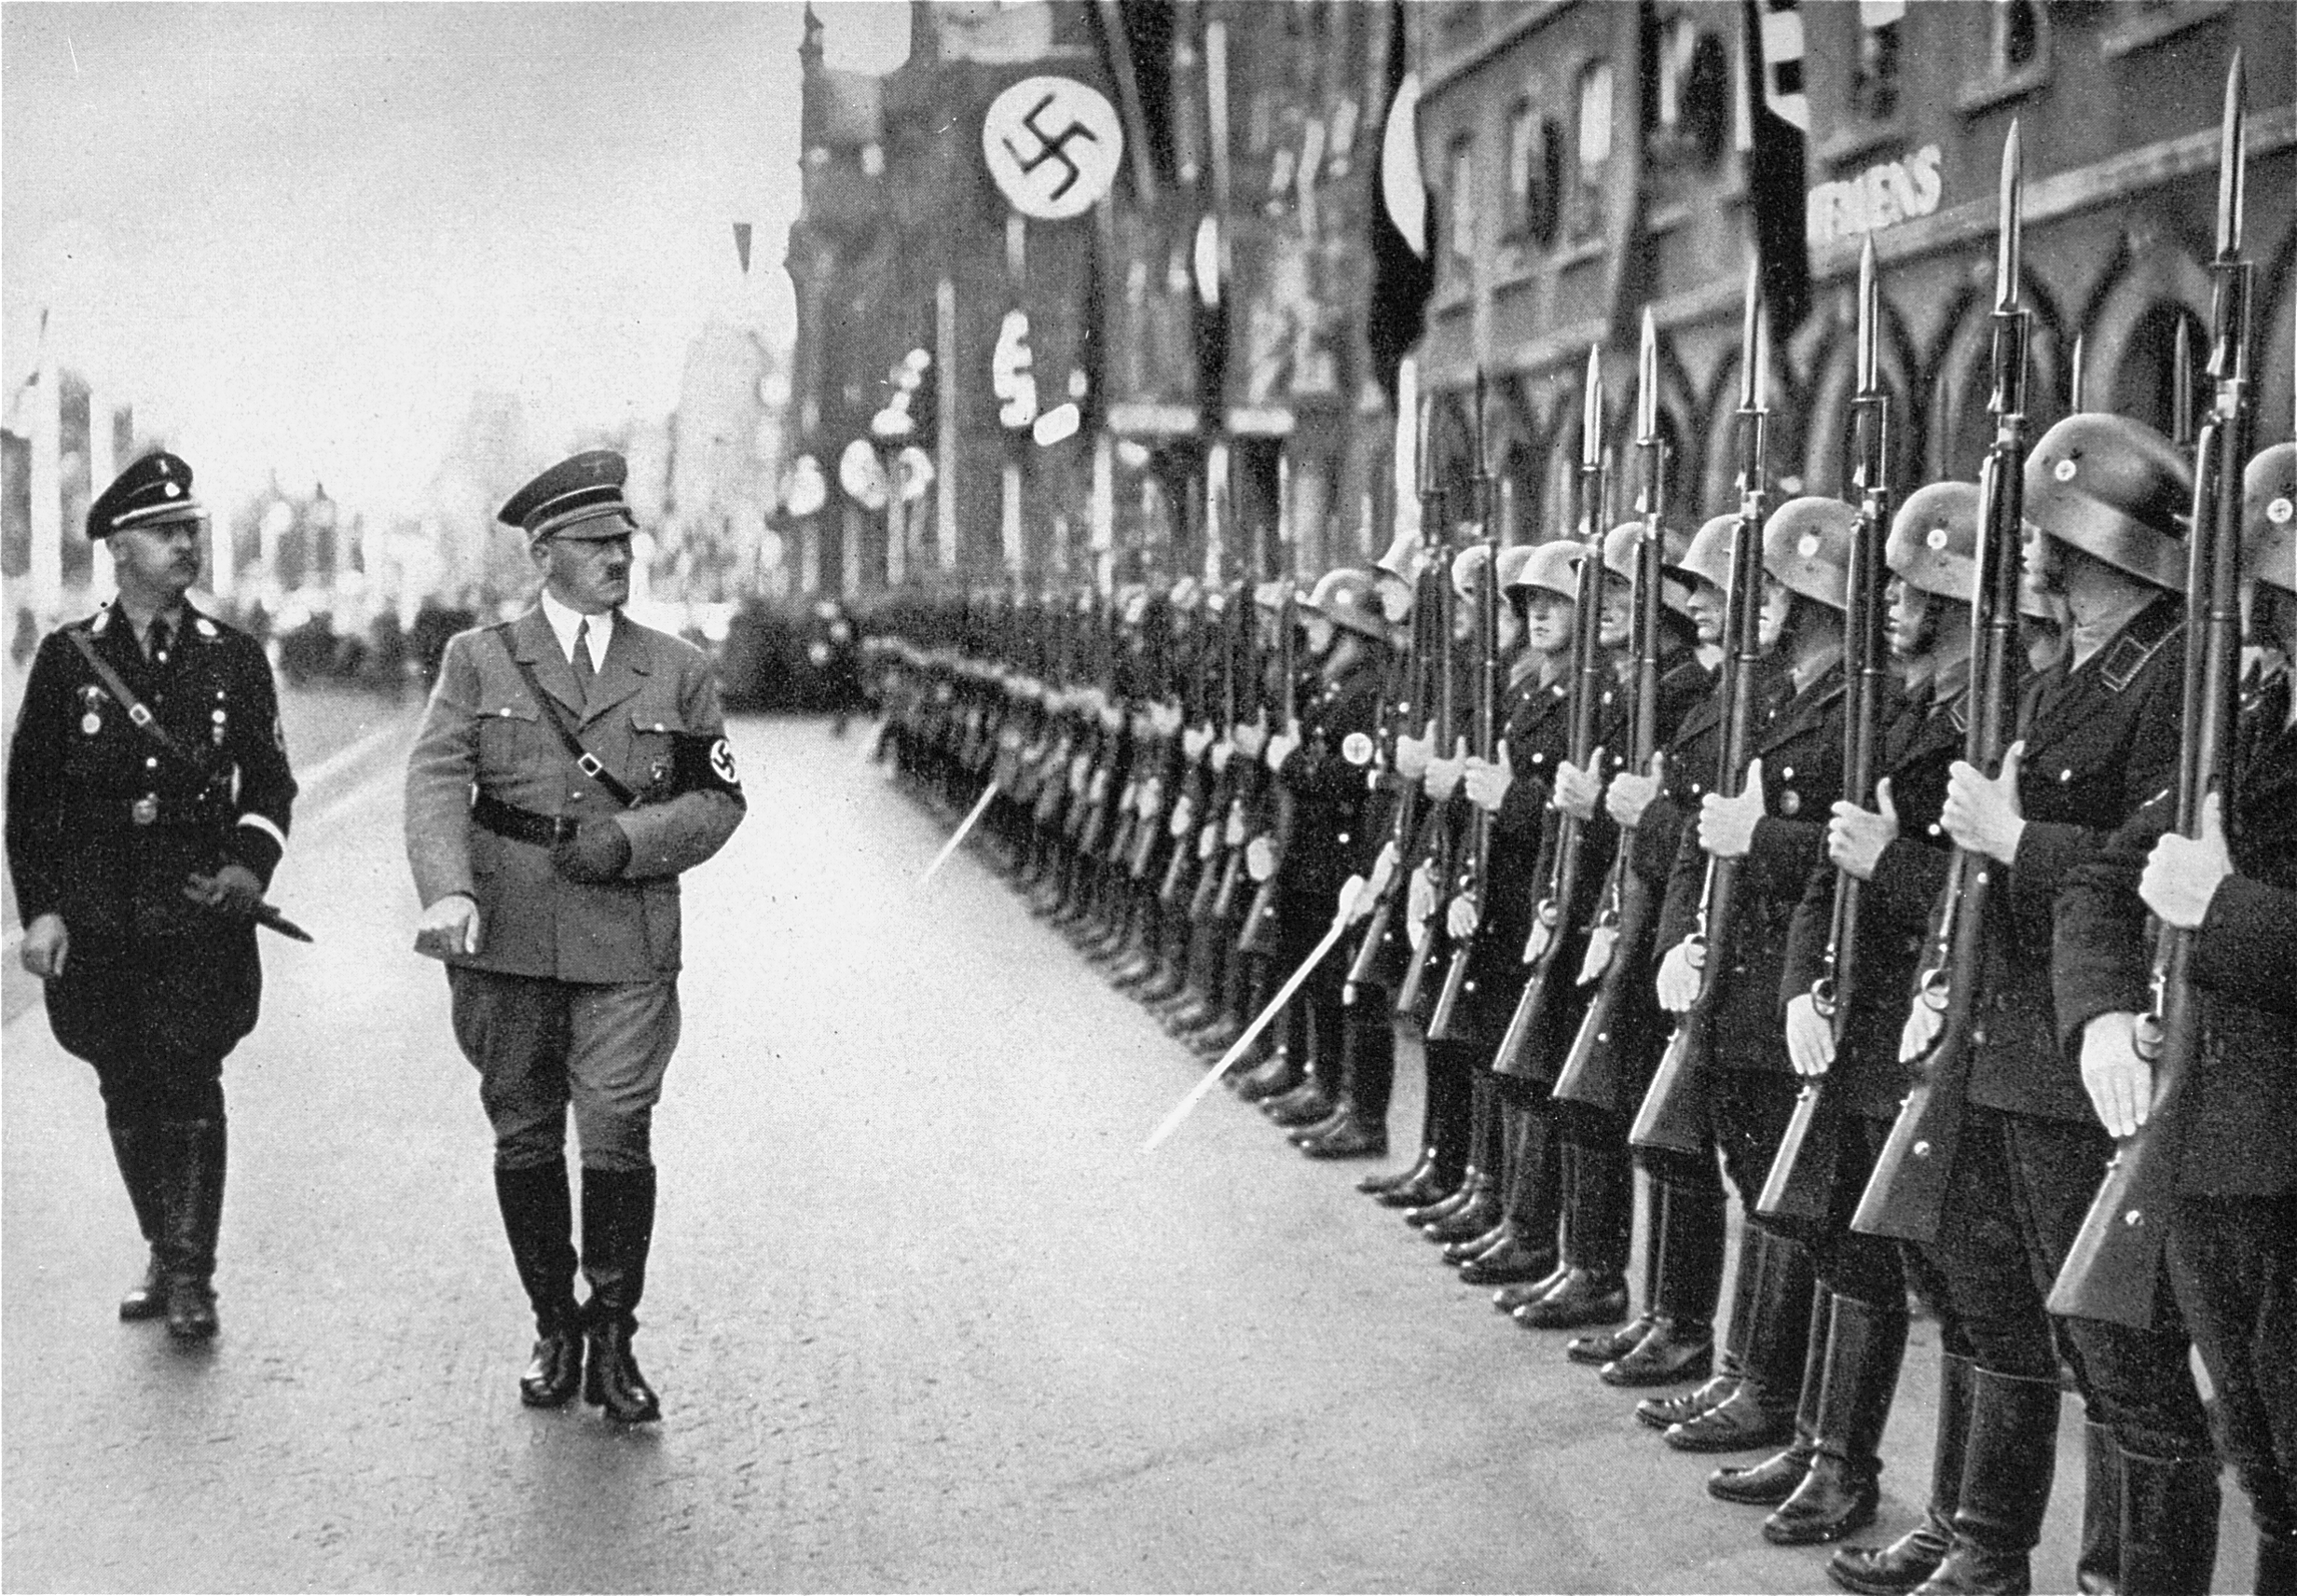 Adolf Hitler and SS Chief Heinrich Himmler review the SS at a Reichsparteitag (Reich Party Day) ceremony in Nuremberg, Germany, September 1935. Photo credit: USHMM #11775